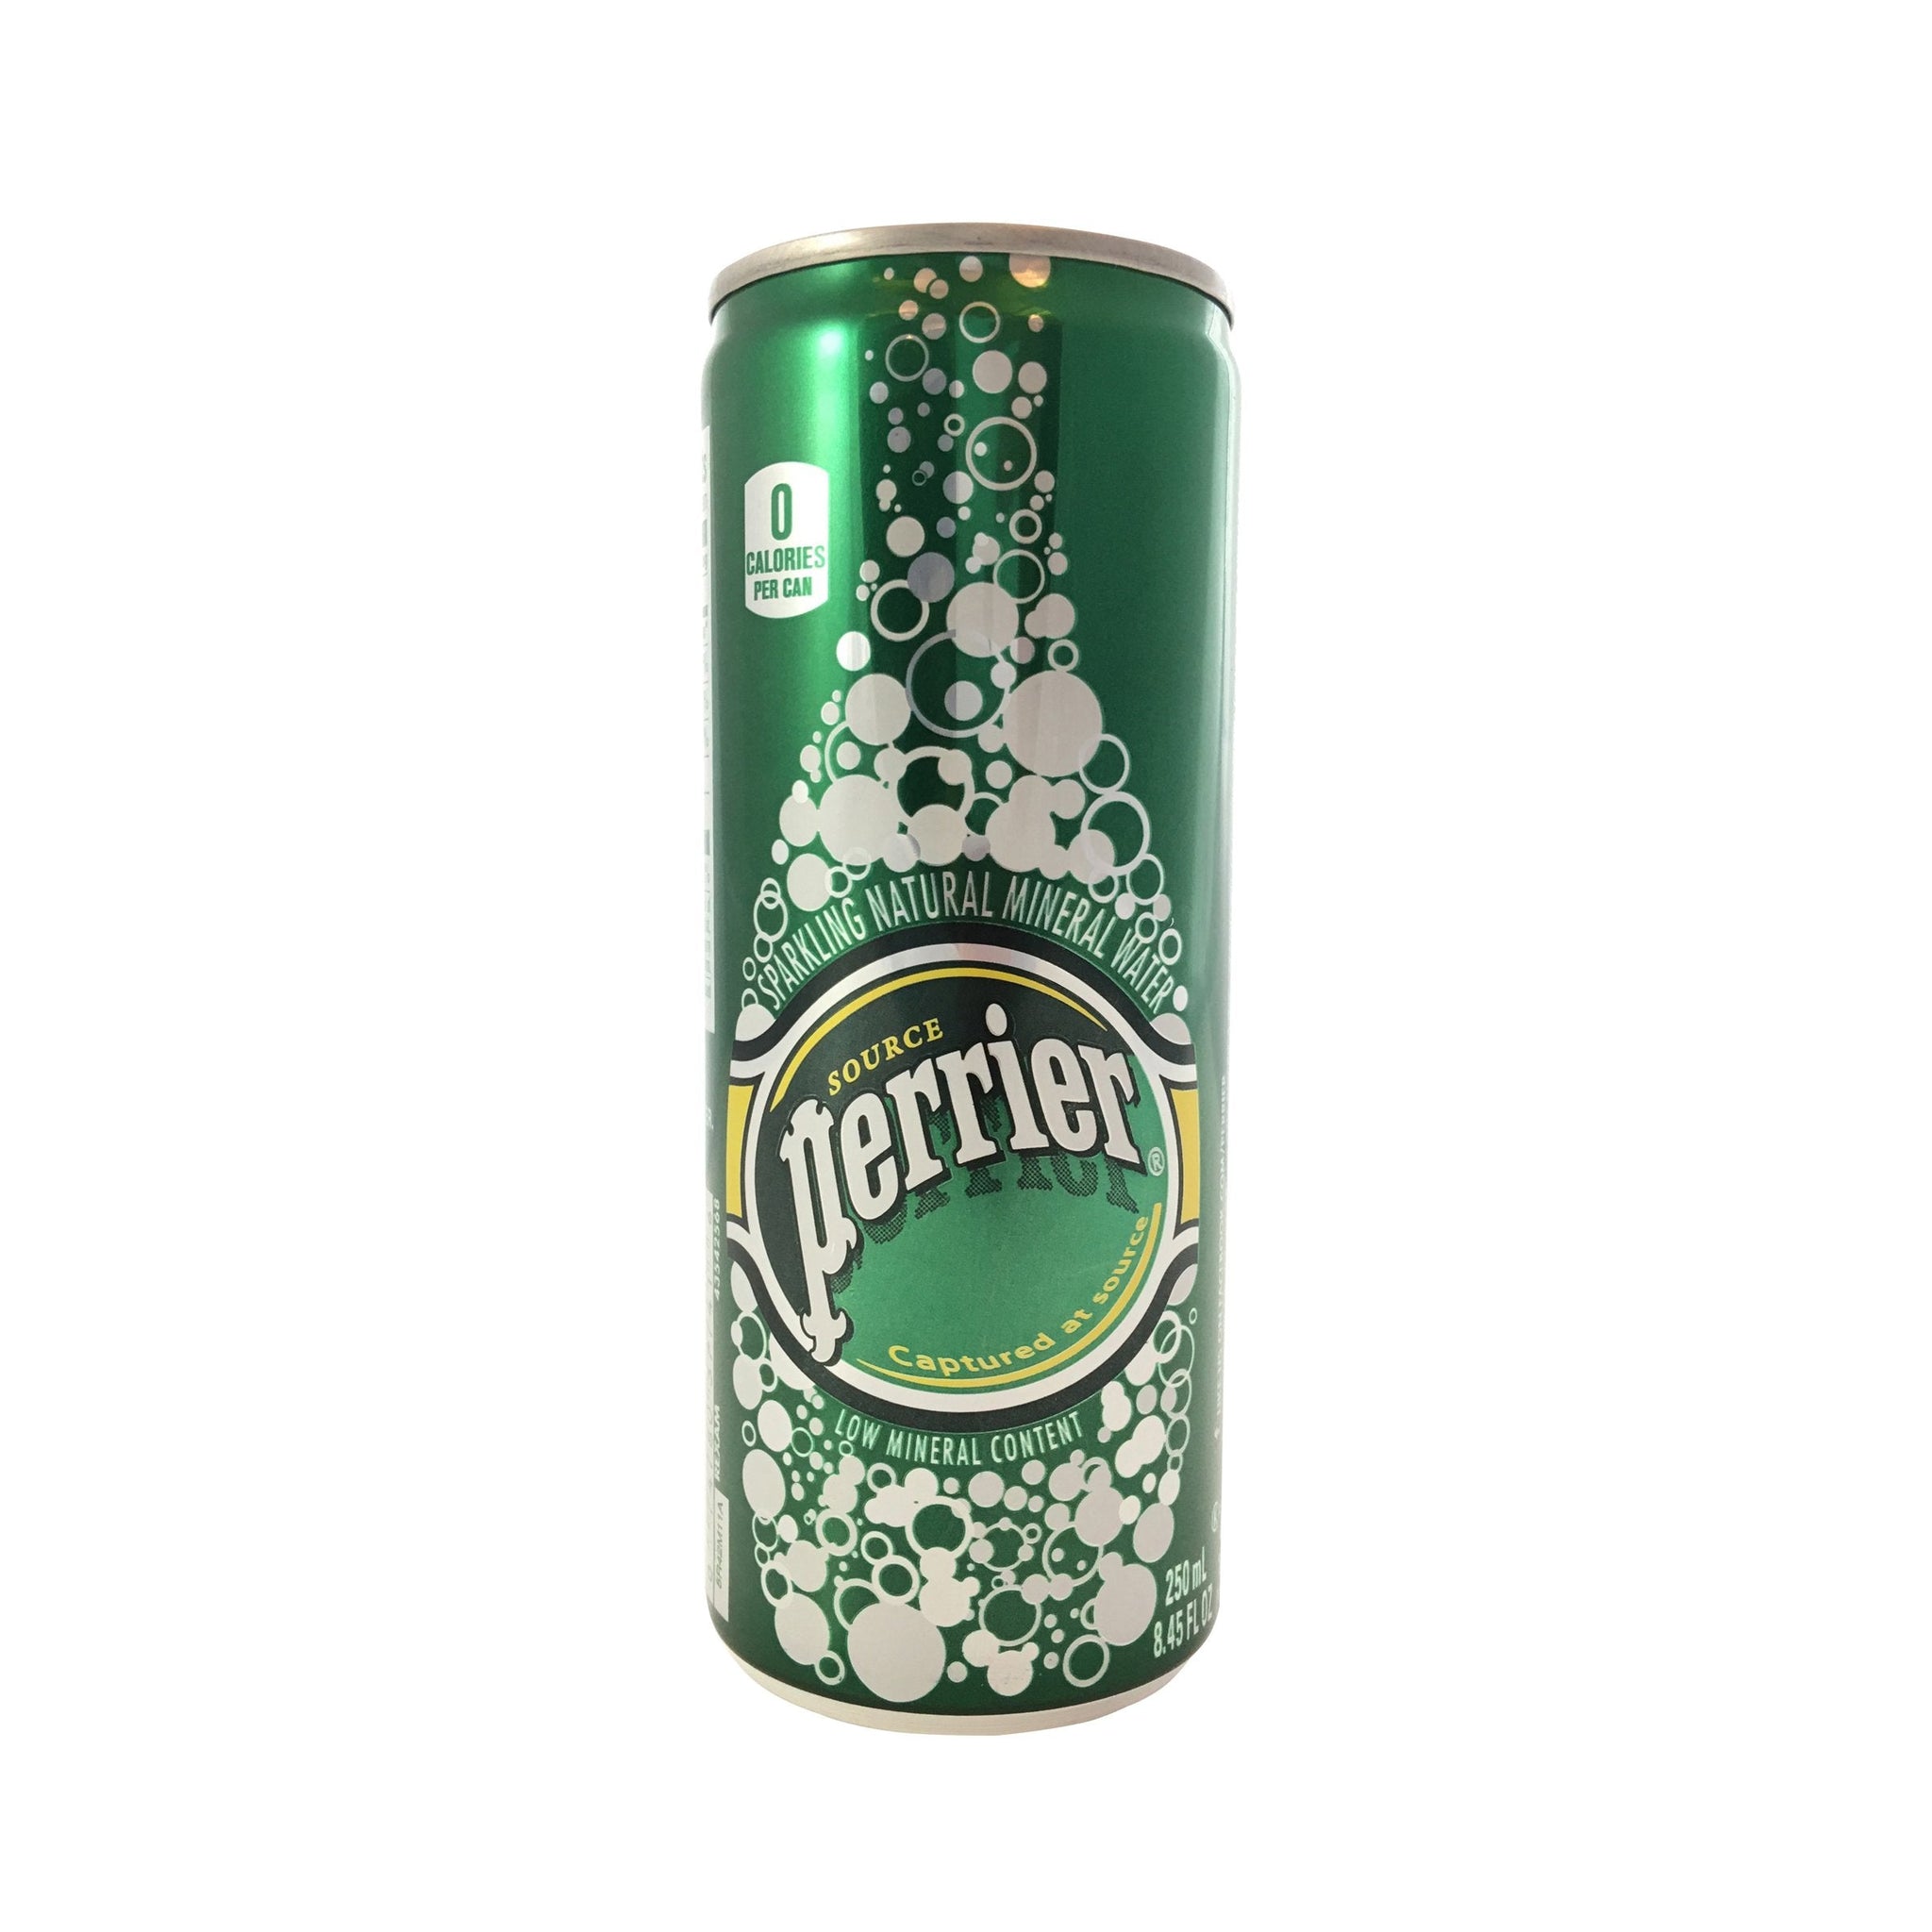 bvi>Perrier Sparkling Water Original - 250 ml cans, 10 pack